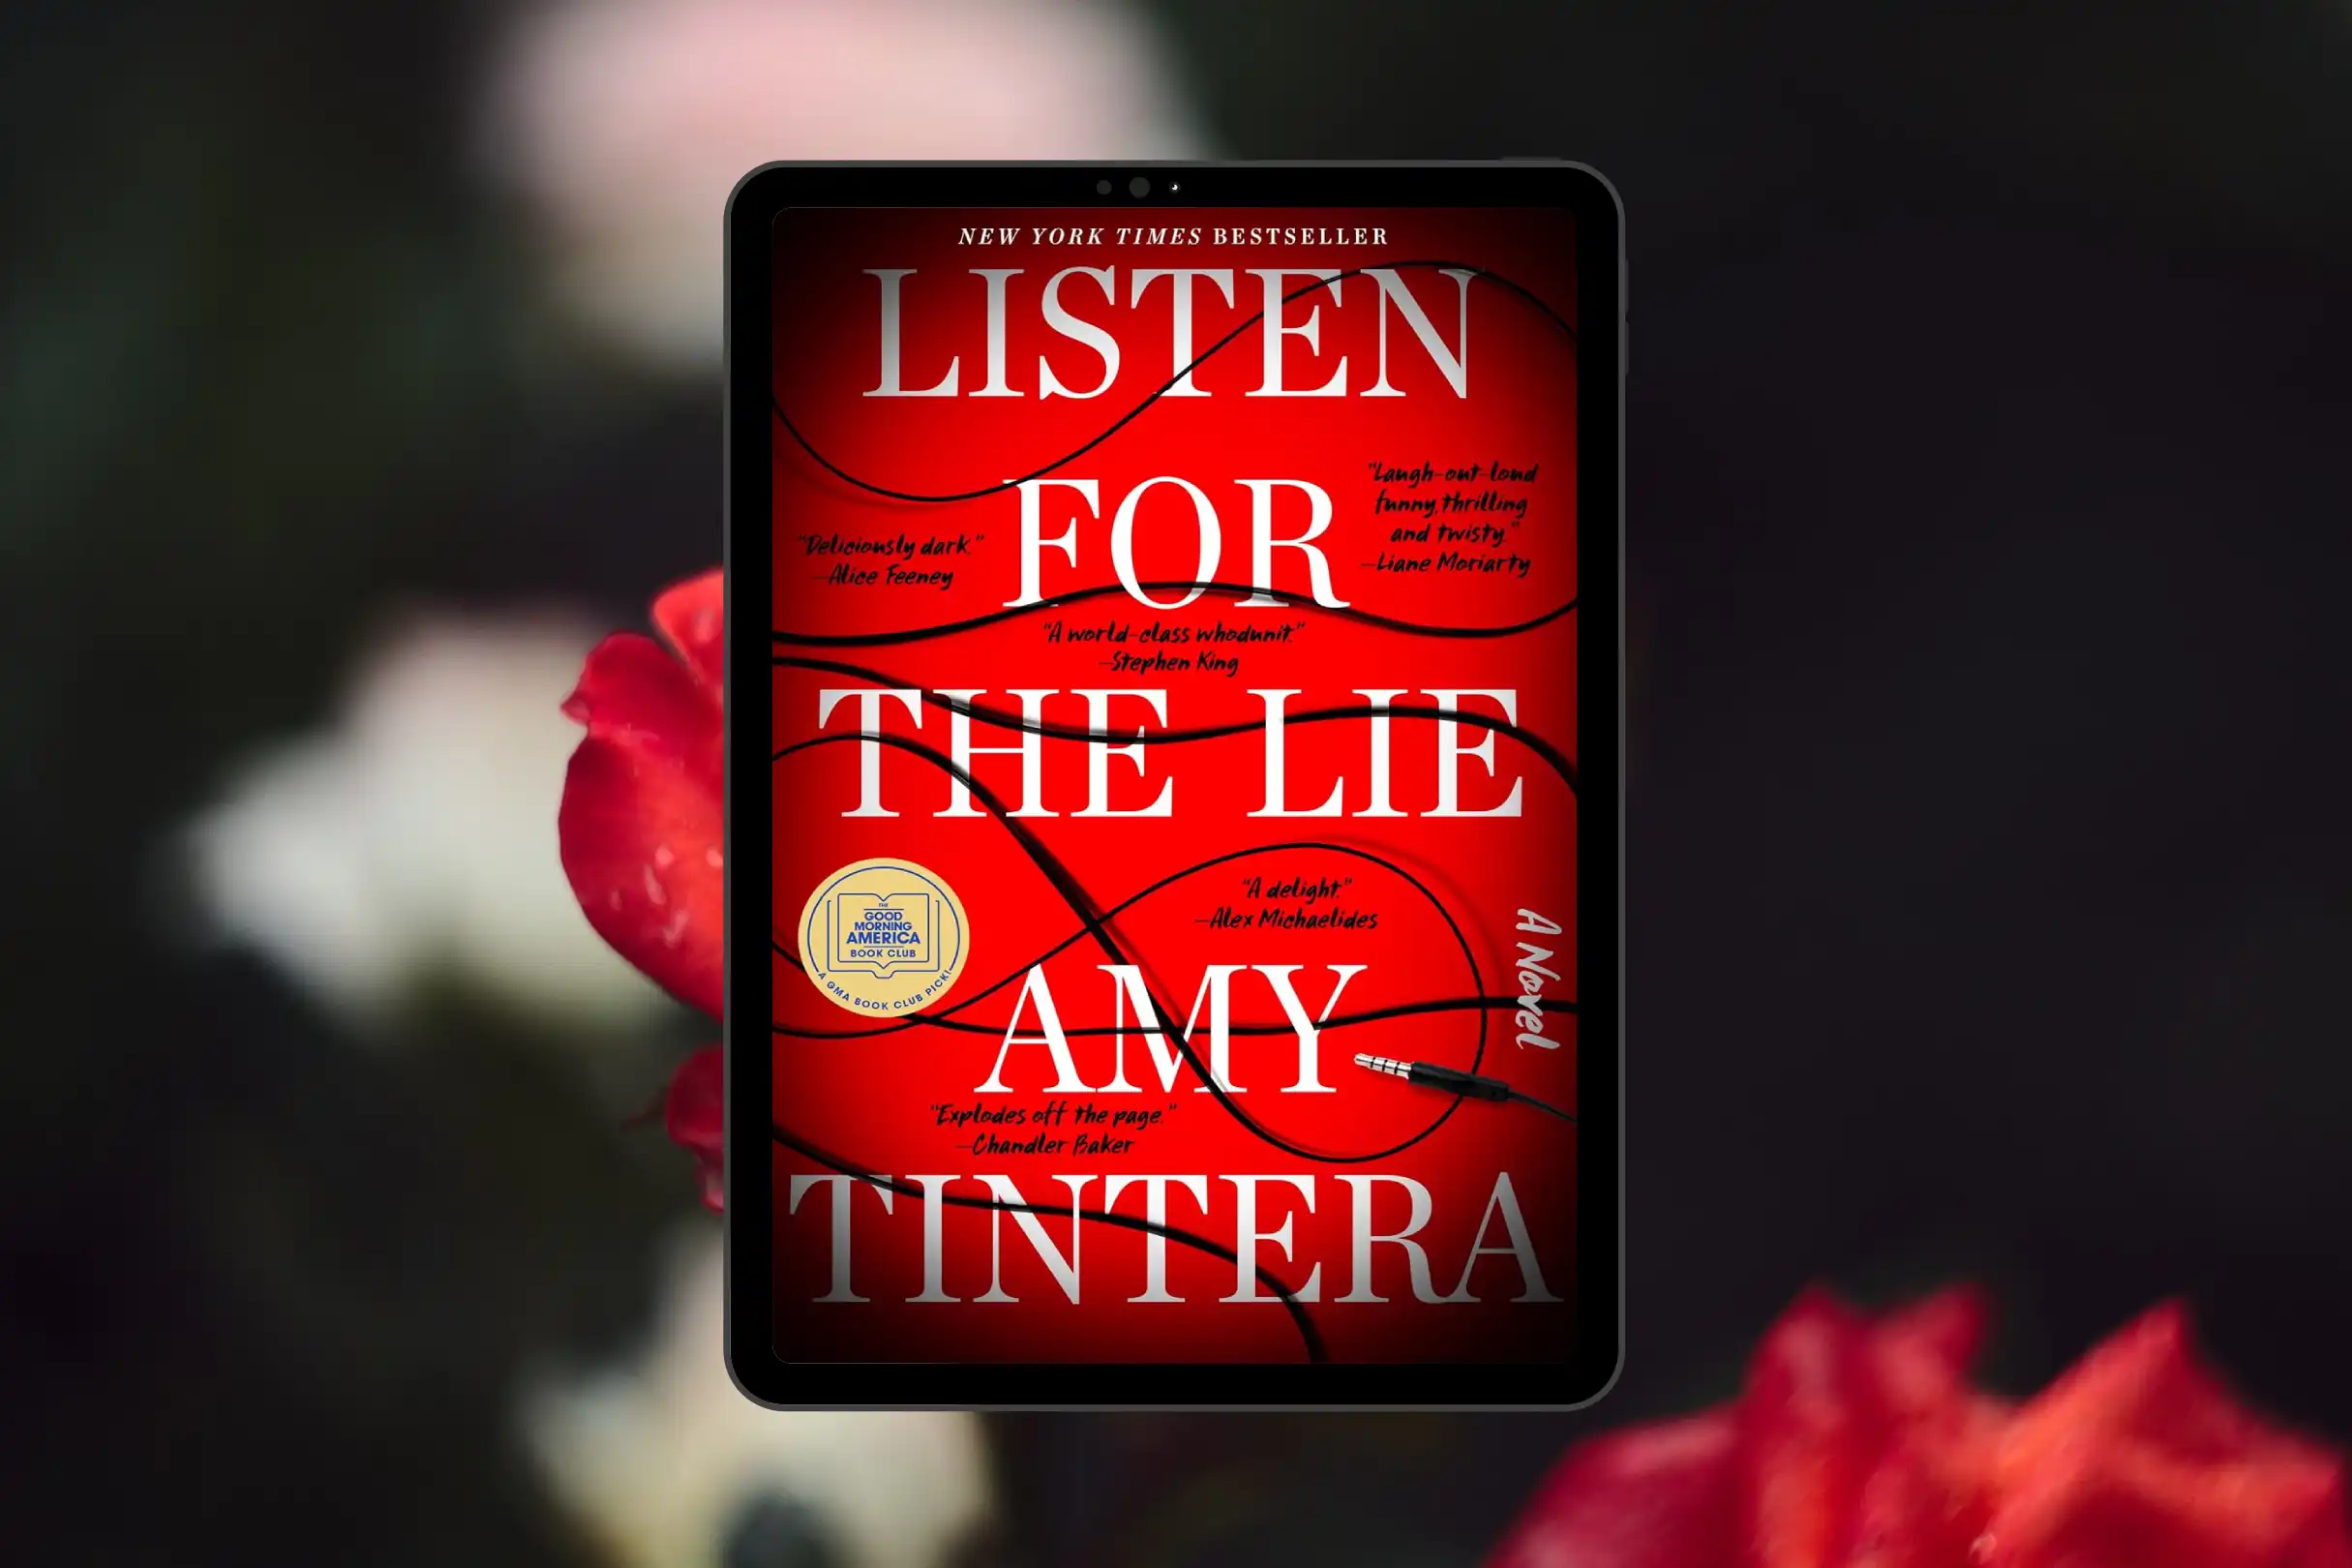 listen_for_the_lie_book_discussion_guide